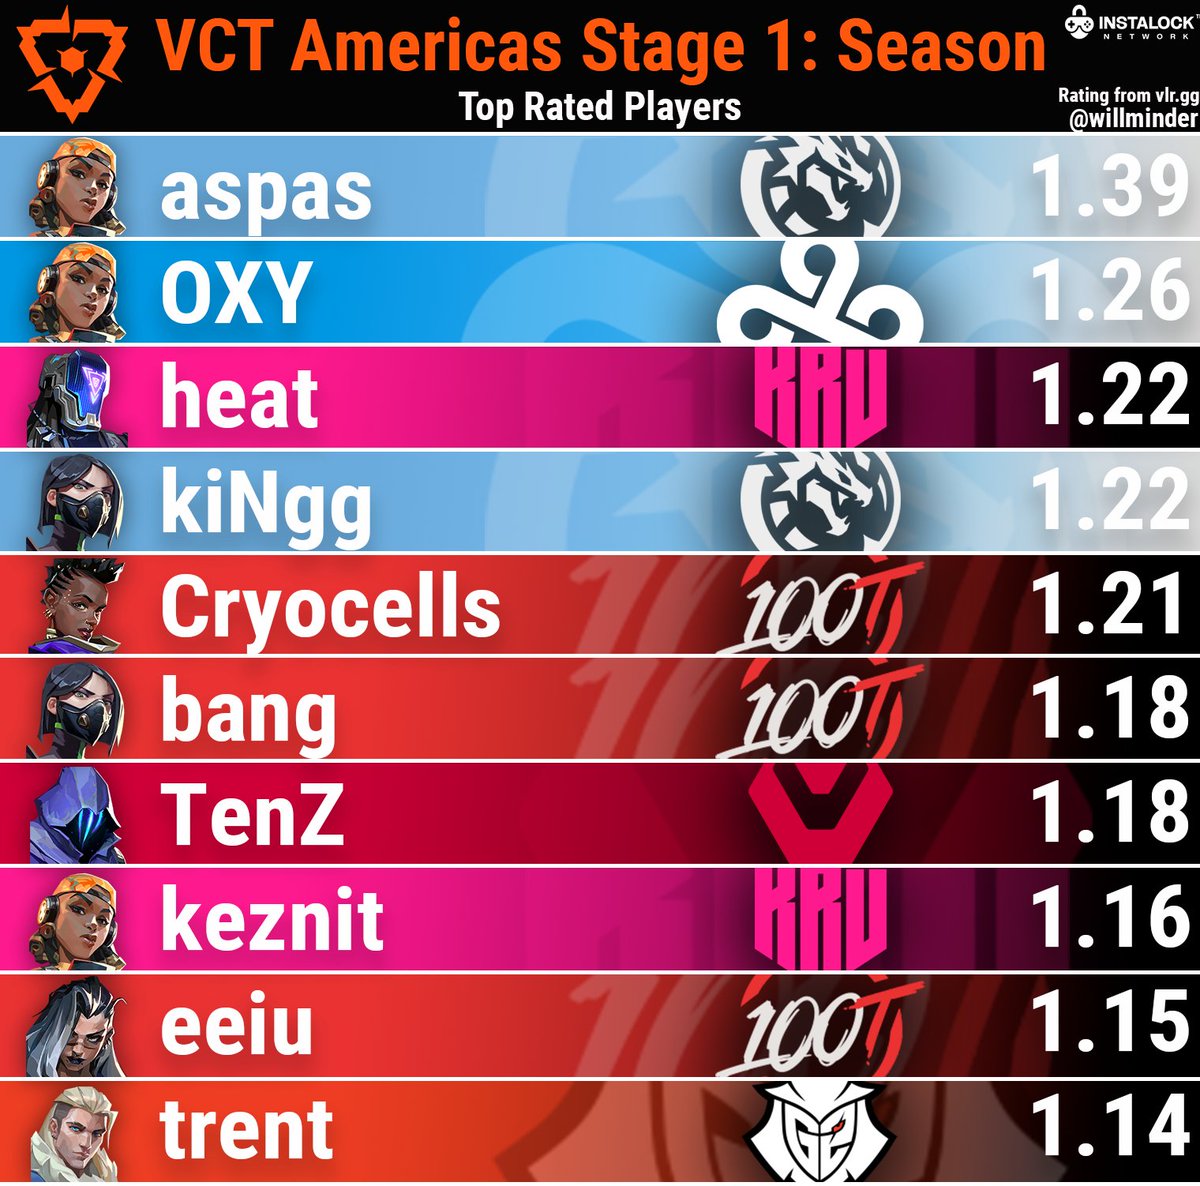 Top Rated players from VCT Americas Stage 1 Regular Season | @INSTALOCKnet